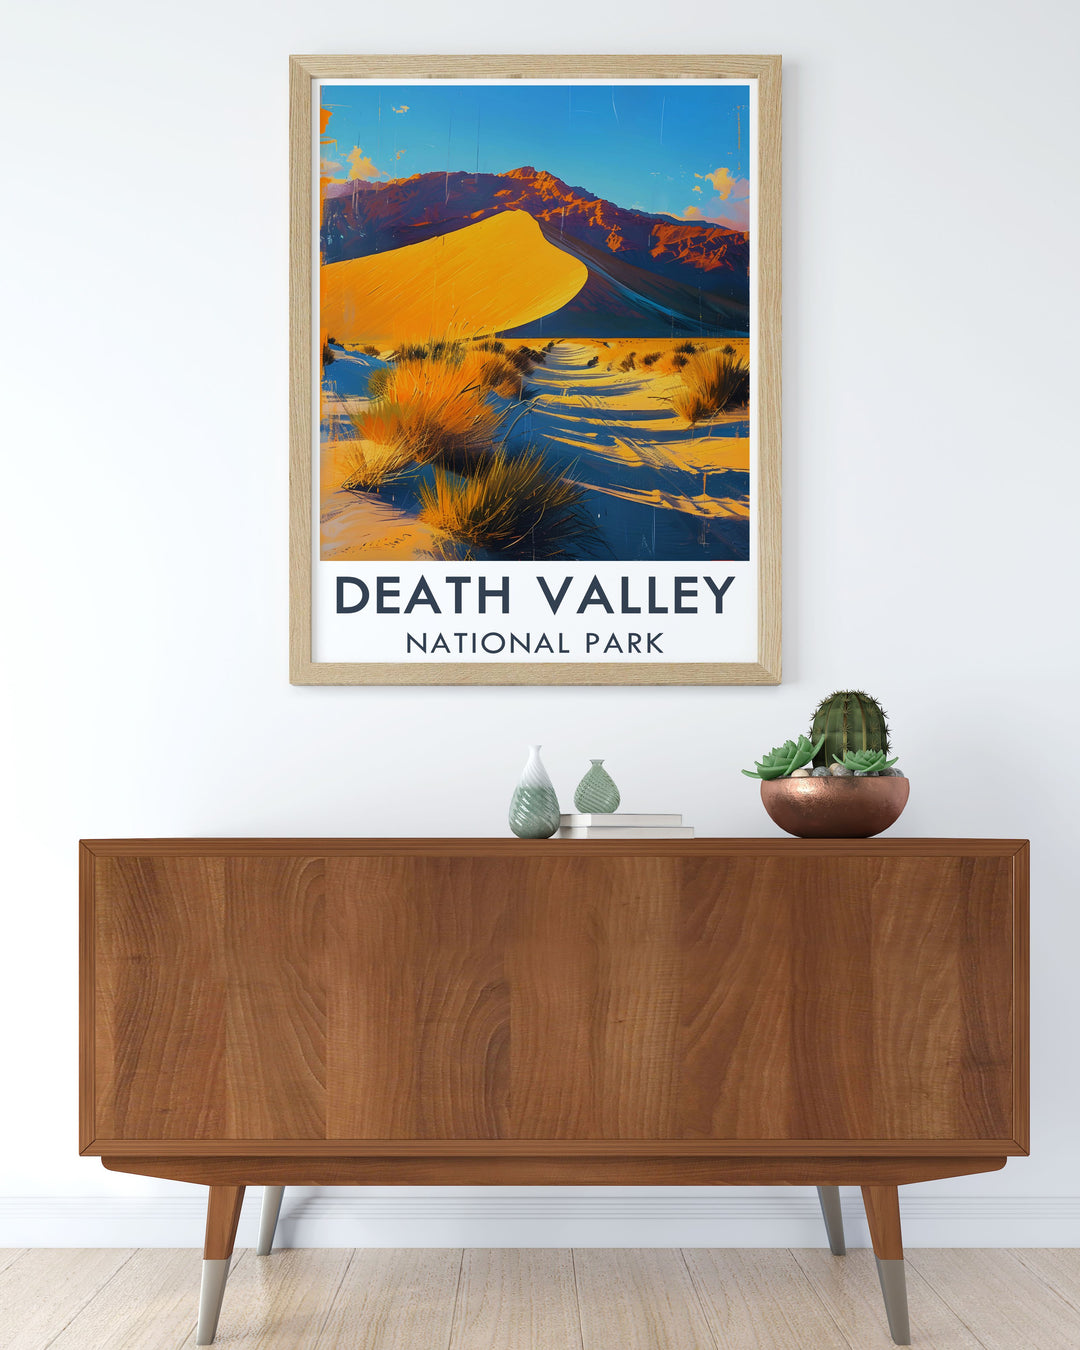 Framed art showcasing the serene beauty of the Mesquite Flat Sand Dunes in Death Valley, capturing the otherworldly landscape and the parks natural splendor.